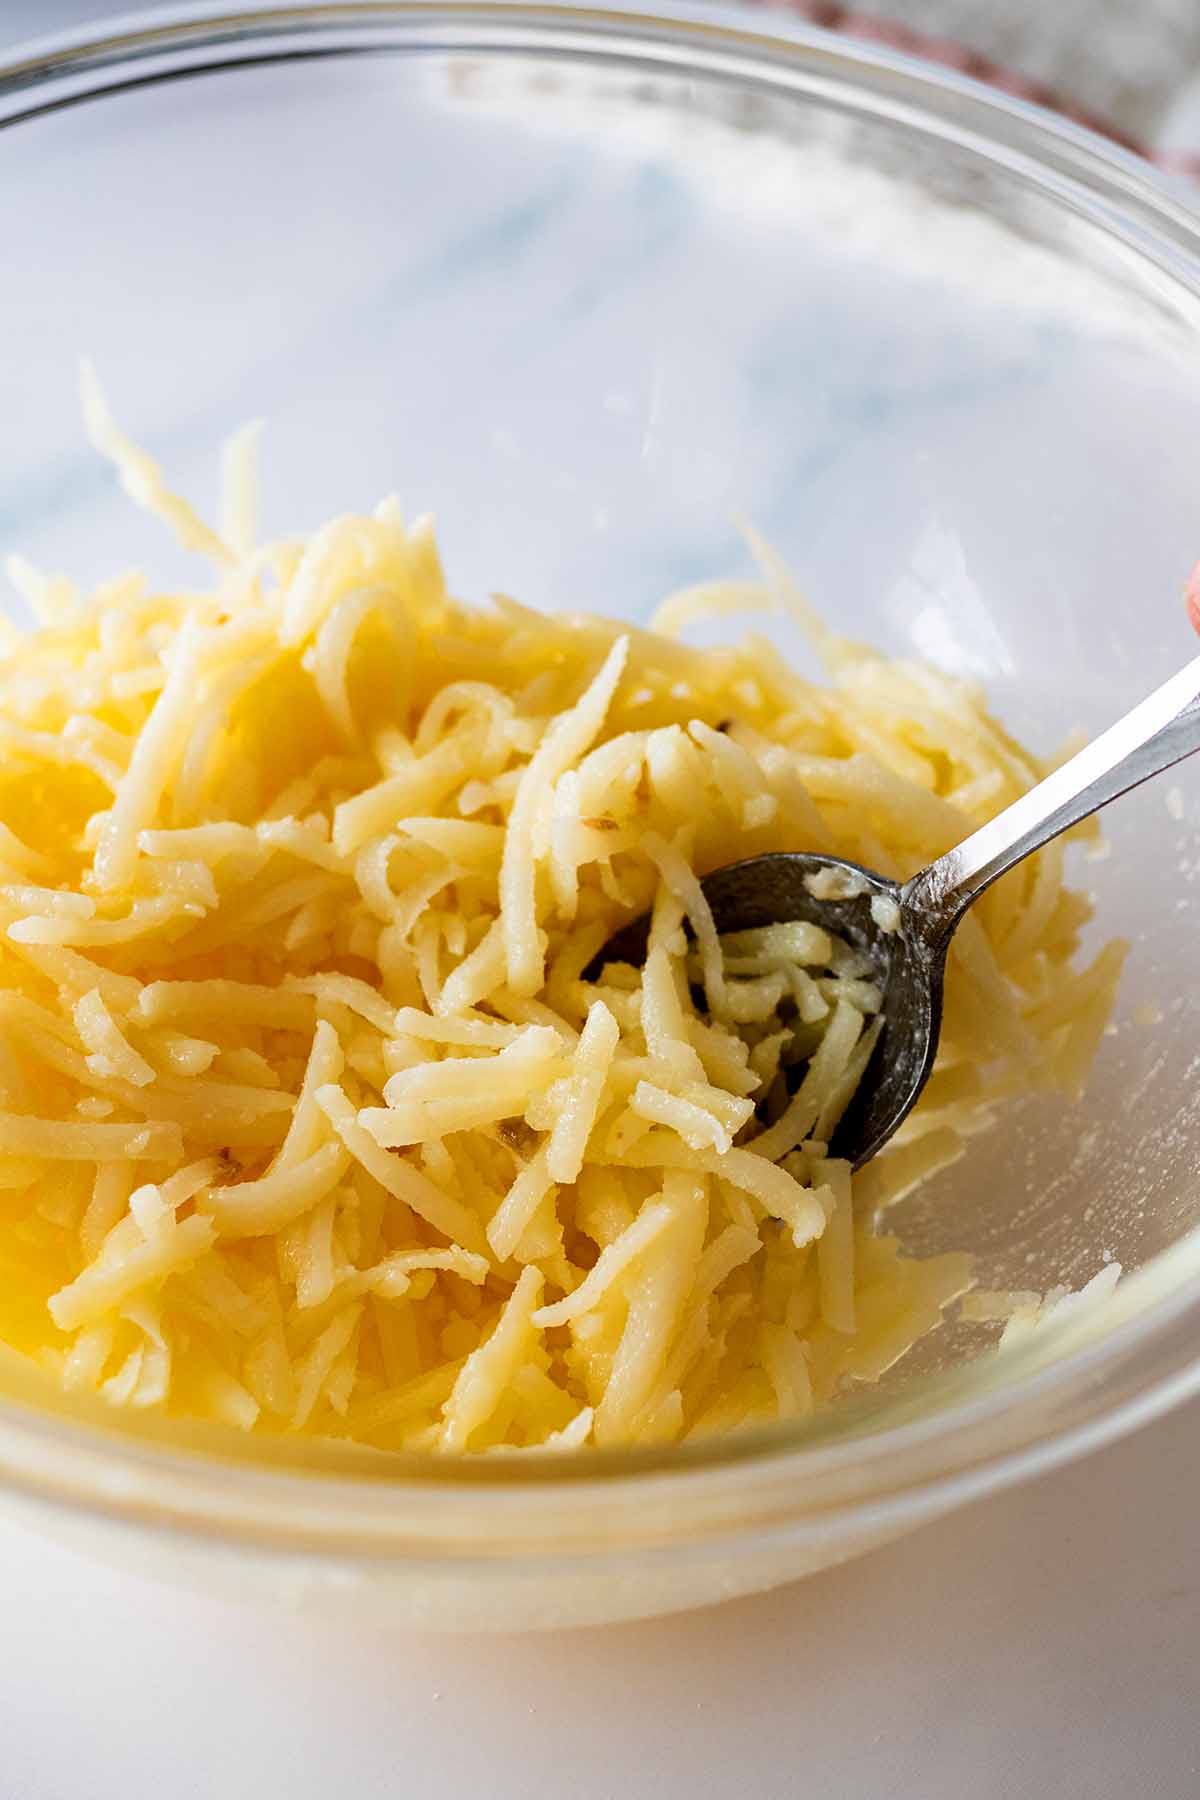 Raw shredded hash brown potatoes in a glass bowl with a spoon